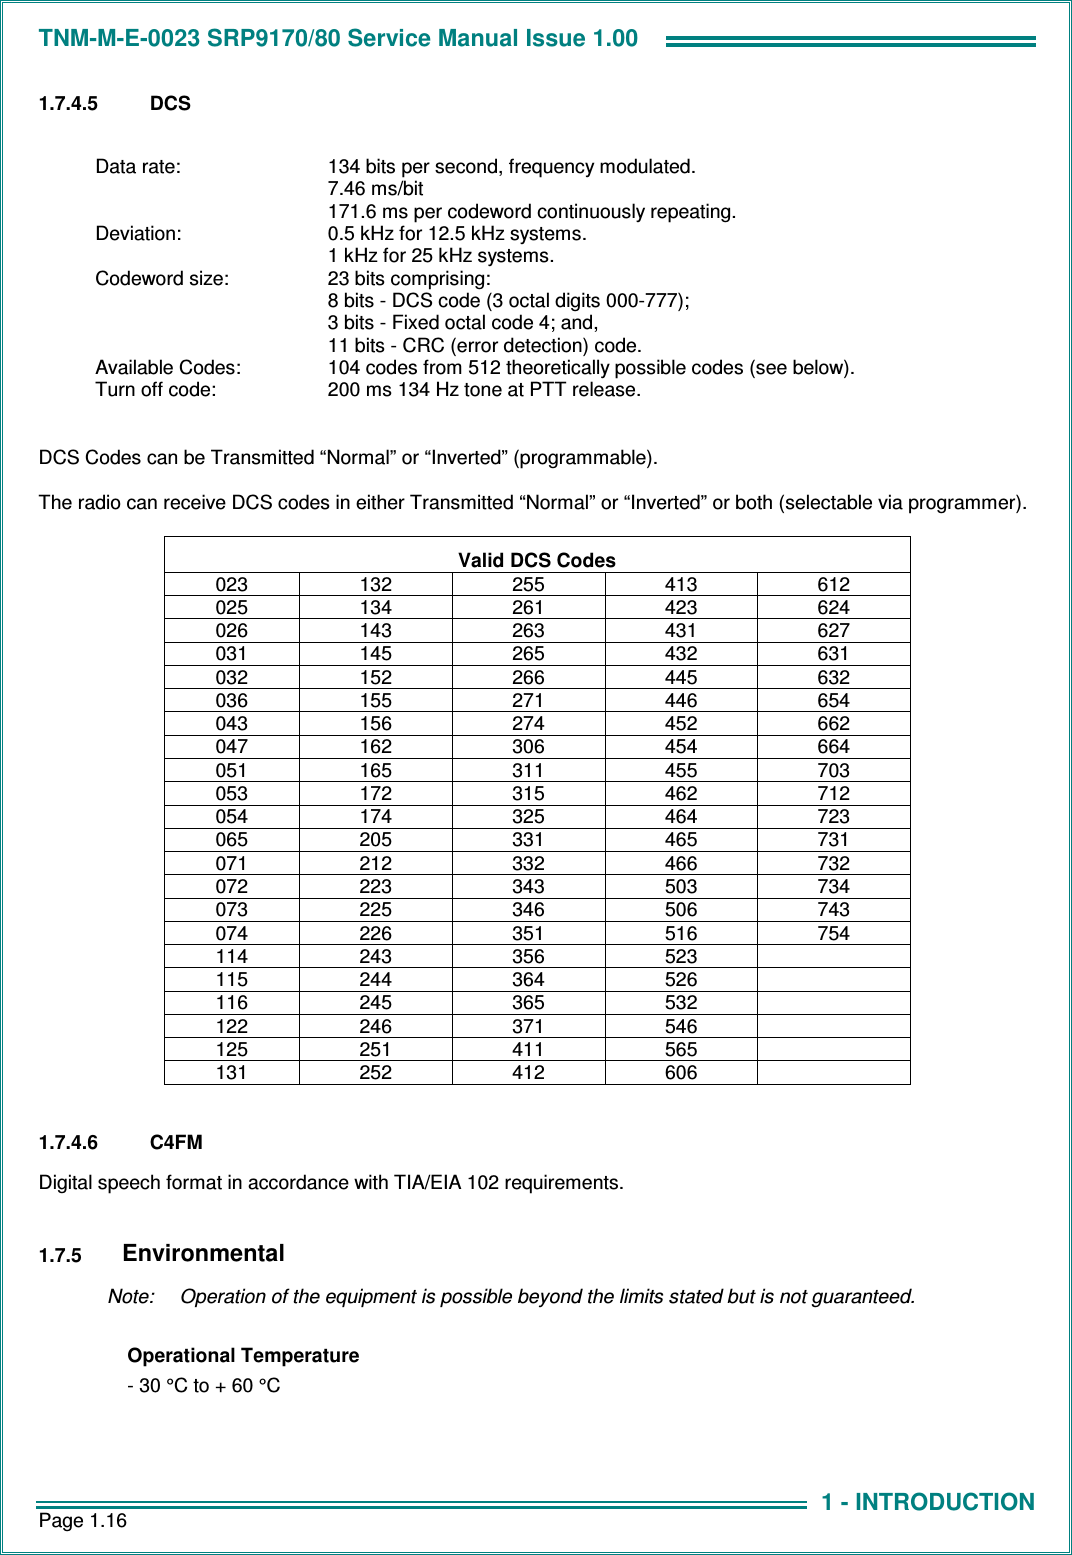 TNM-M-E-0023 SRP9170/80 Service Manual Issue 1.00 Page 1.16 1 - INTRODUCTION 1.7.4.5  DCS  Data rate:  134 bits per second, frequency modulated. 7.46 ms/bit 171.6 ms per codeword continuously repeating. Deviation:  0.5 kHz for 12.5 kHz systems. 1 kHz for 25 kHz systems. Codeword size:  23 bits comprising: 8 bits - DCS code (3 octal digits 000-777); 3 bits - Fixed octal code 4; and, 11 bits - CRC (error detection) code. Available Codes:  104 codes from 512 theoretically possible codes (see below). Turn off code:  200 ms 134 Hz tone at PTT release.  DCS Codes can be Transmitted “Normal” or “Inverted” (programmable).  The radio can receive DCS codes in either Transmitted “Normal” or “Inverted” or both (selectable via programmer).  Valid DCS Codes 023  132  255  413  612 025  134  261  423  624 026  143  263  431  627 031  145  265  432  631 032  152  266  445  632 036  155  271  446  654 043  156  274  452  662 047  162  306  454  664 051  165  311  455  703 053  172  315  462  712 054  174  325  464  723 065  205  331  465  731 071  212  332  466  732 072  223  343  503  734 073  225  346  506  743 074  226  351  516  754 114  243  356  523   115  244  364  526   116  245  365  532   122  246  371  546   125  251  411  565   131  252  412  606    1.7.4.6  C4FM Digital speech format in accordance with TIA/EIA 102 requirements.  1.7.5 Environmental   Note:  Operation of the equipment is possible beyond the limits stated but is not guaranteed.  Operational Temperature - 30 °C to + 60 °C        